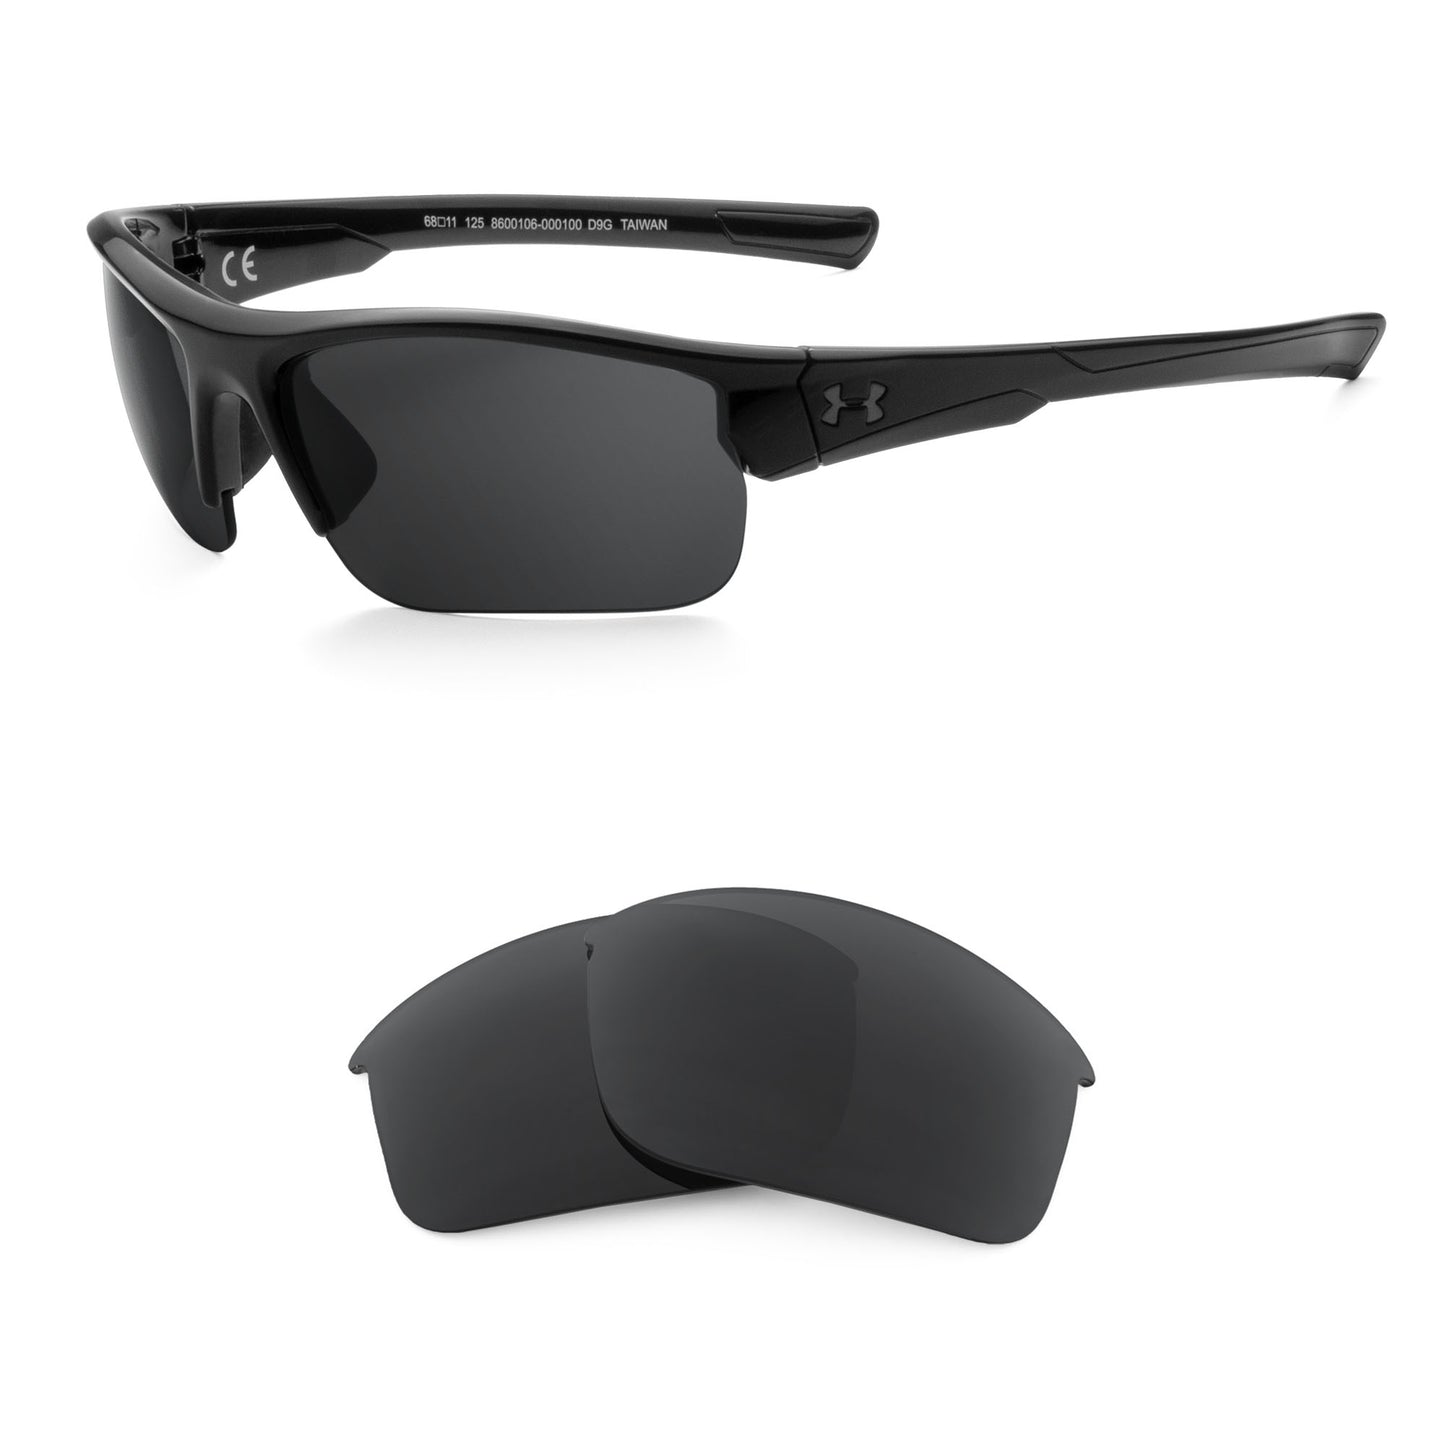 Under Armour Propel sunglasses with replacement lenses